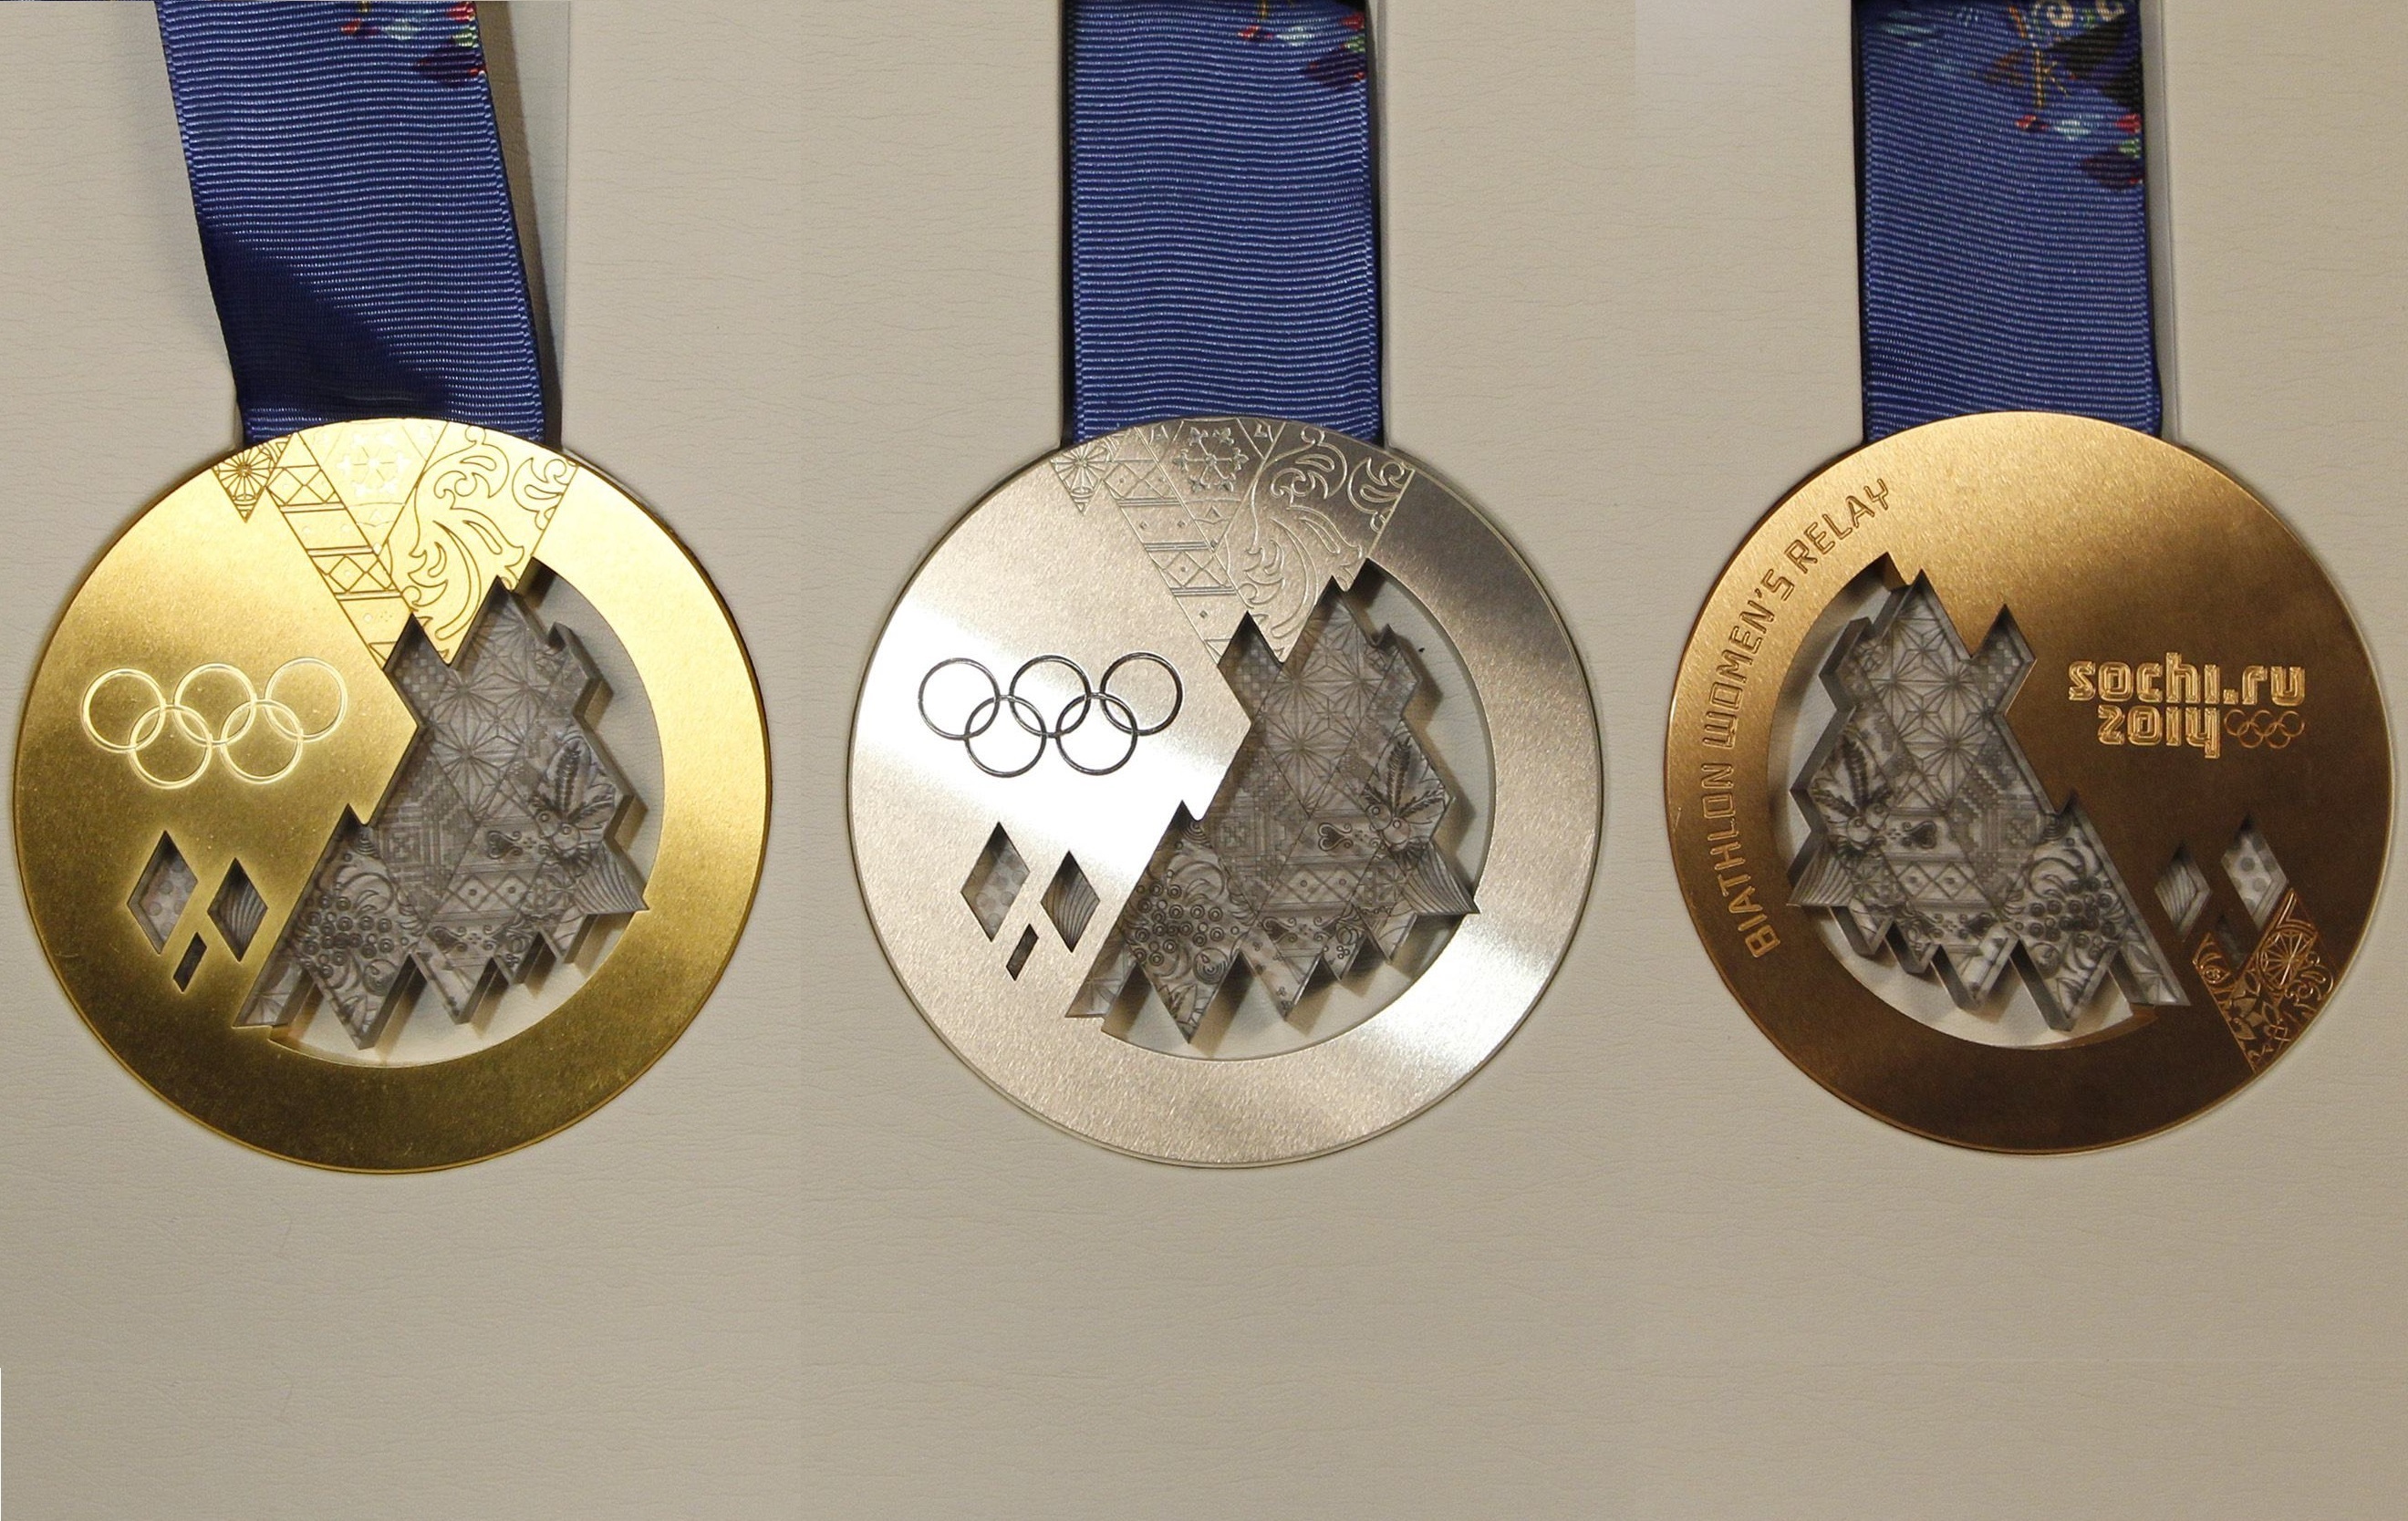 olympics, sports, gold, medals, silver, medal, bronze, sochi 2014, olympiad